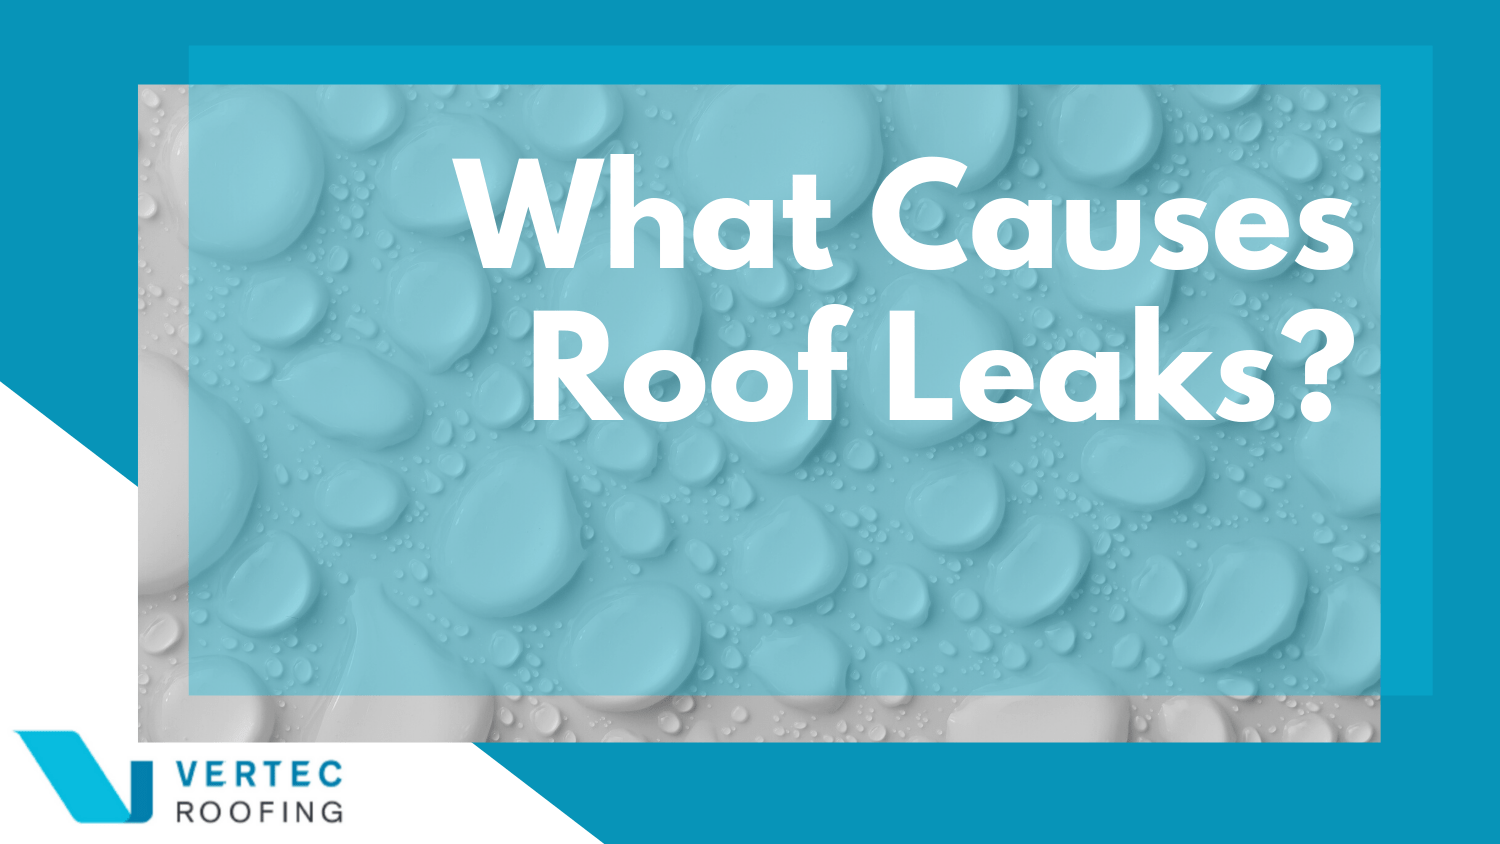 What Causes Roof Leaks?